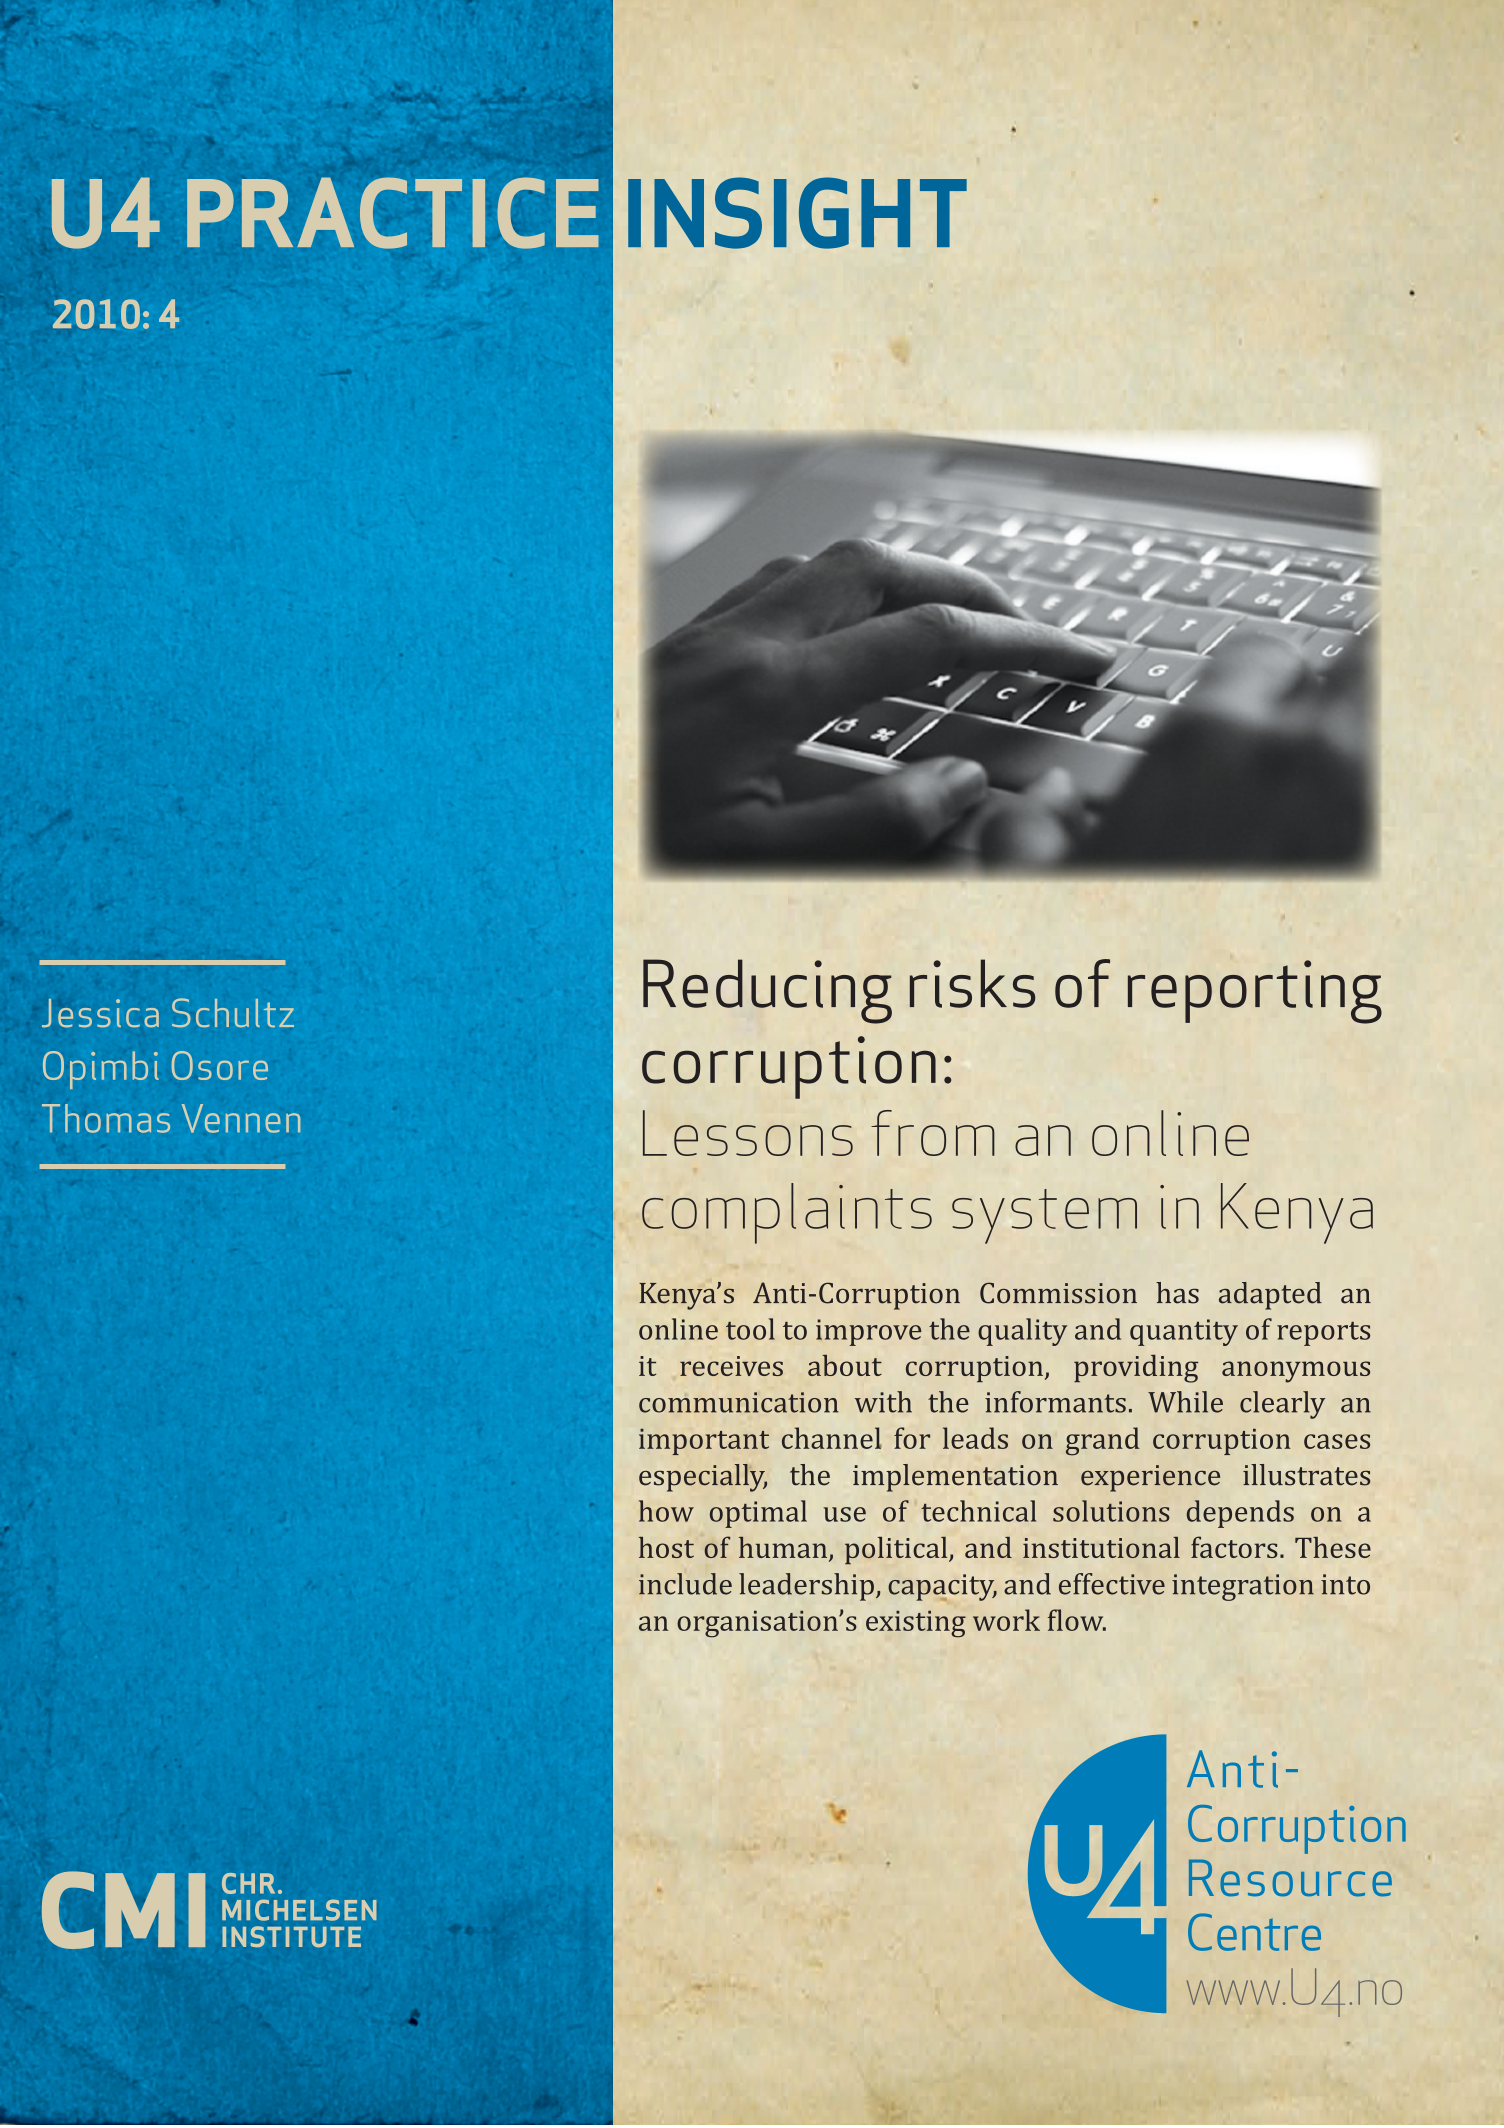 Reducing risks of reporting corruption: Lessons from an online complaints system in Kenya